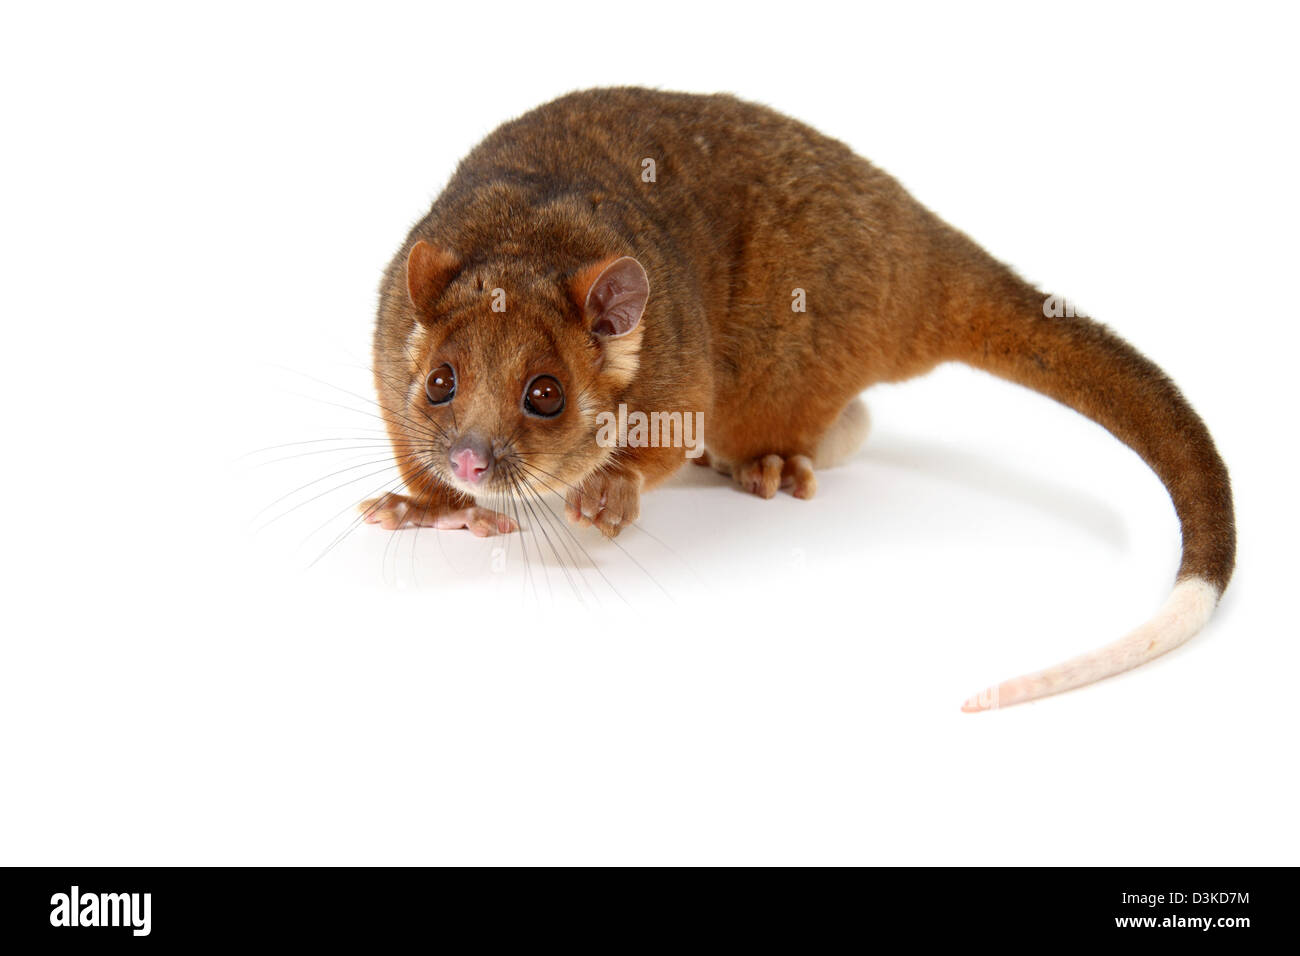 Common ringtail possum in a studio suitable for cut-out Stock Photo